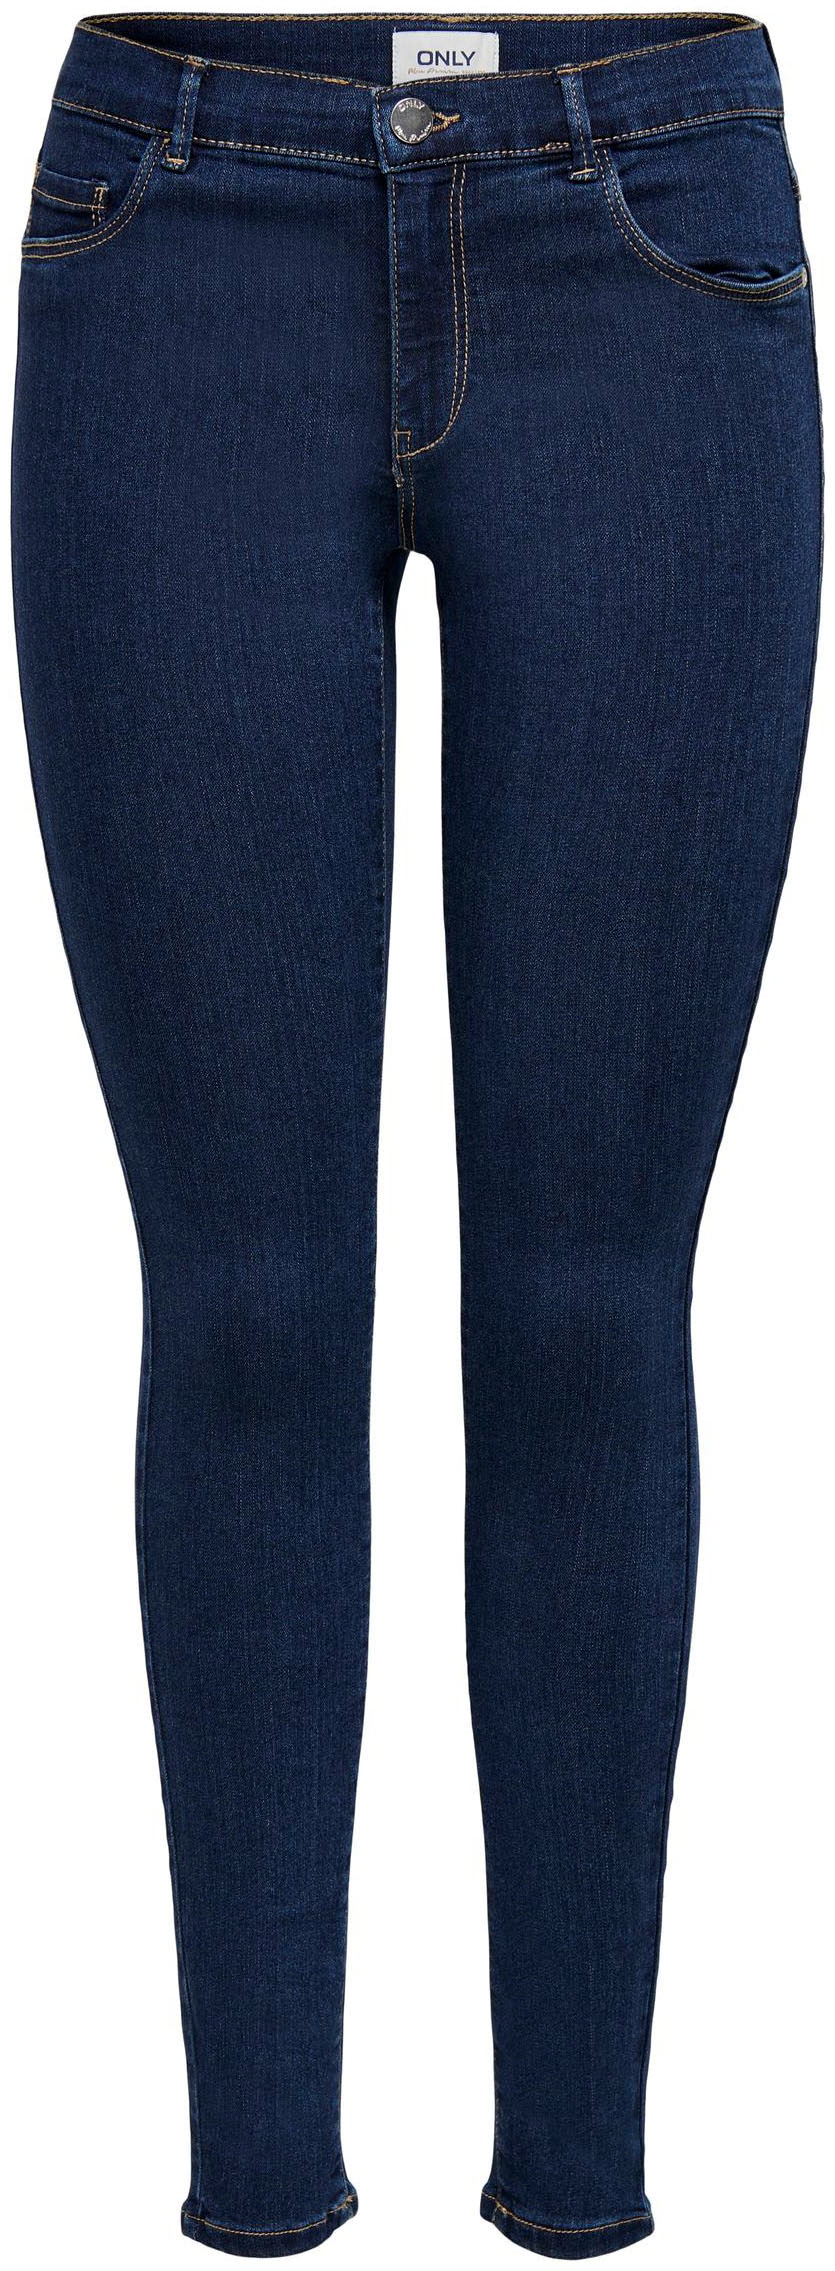 SKINNY Shop OTTO Online LIFE REG Skinny-fit-Jeans »ONLRAIN DNM« ONLY im